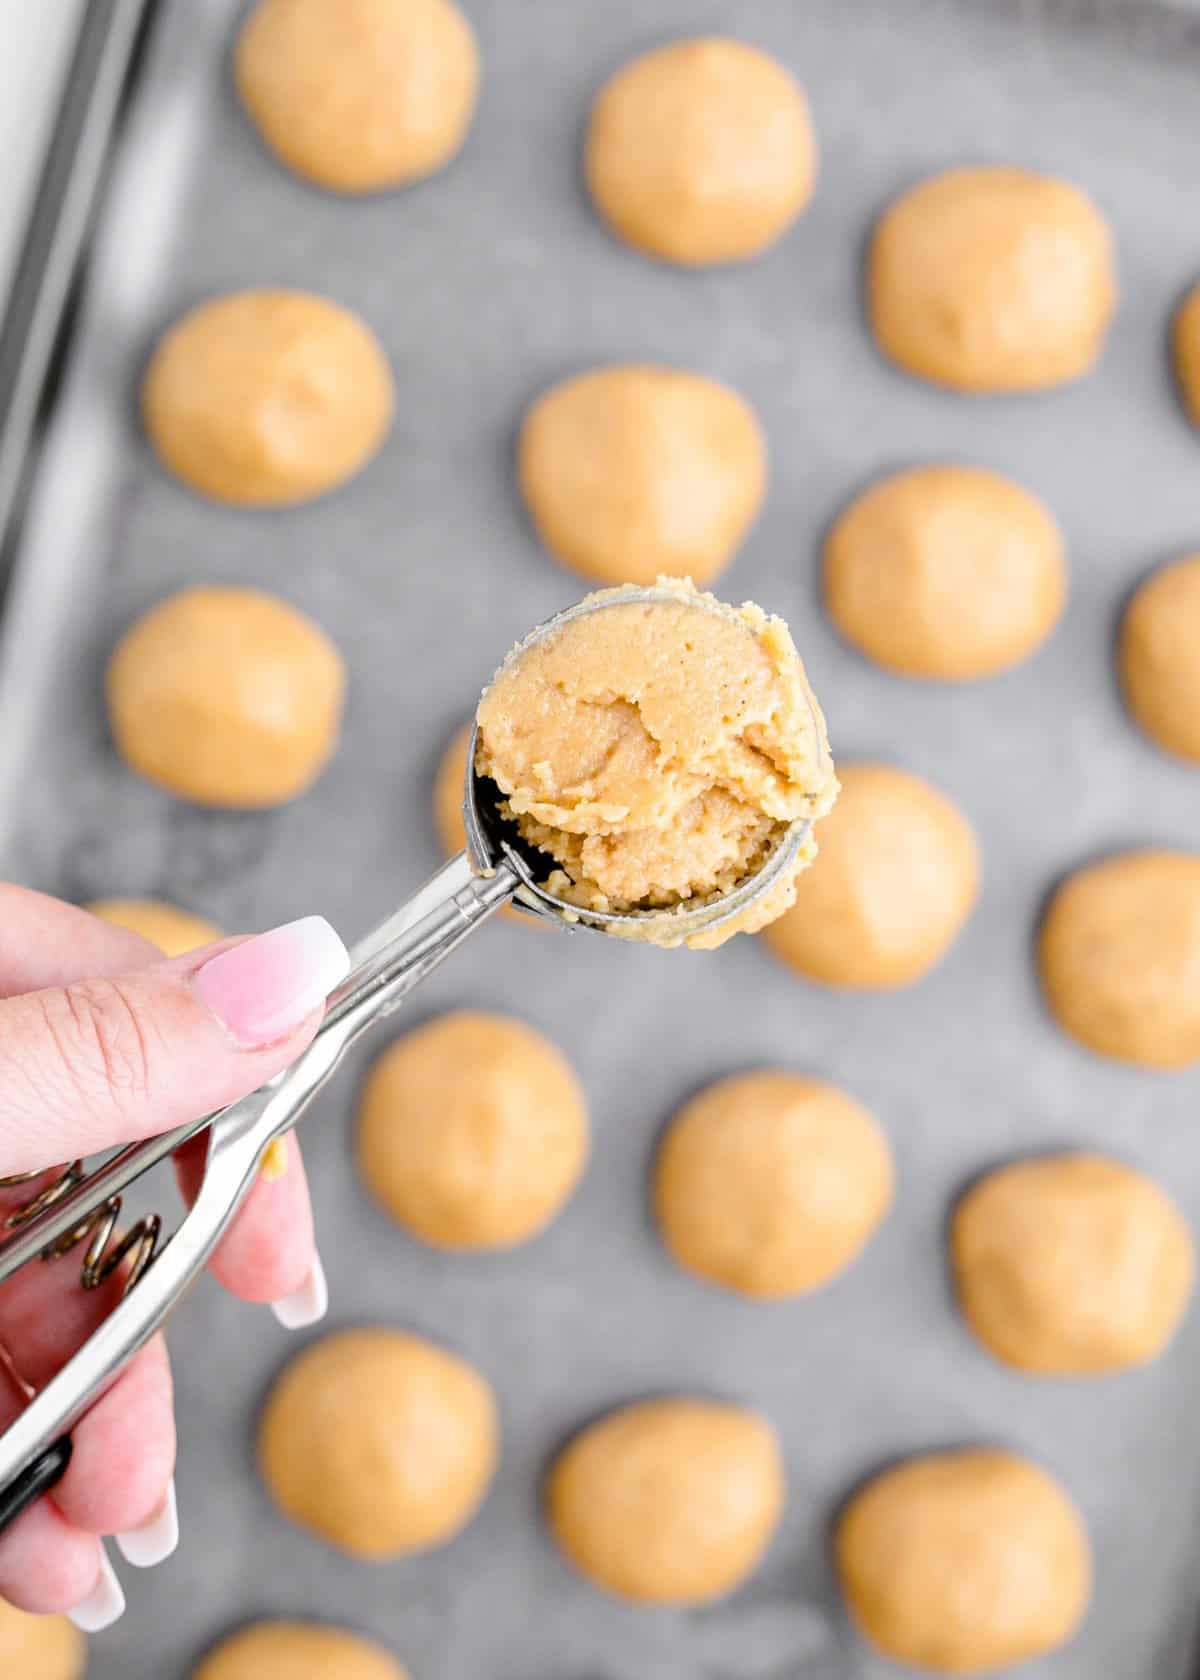 Taking a cookie scoop of the golden oreo truffle dough before rolling into balls. 